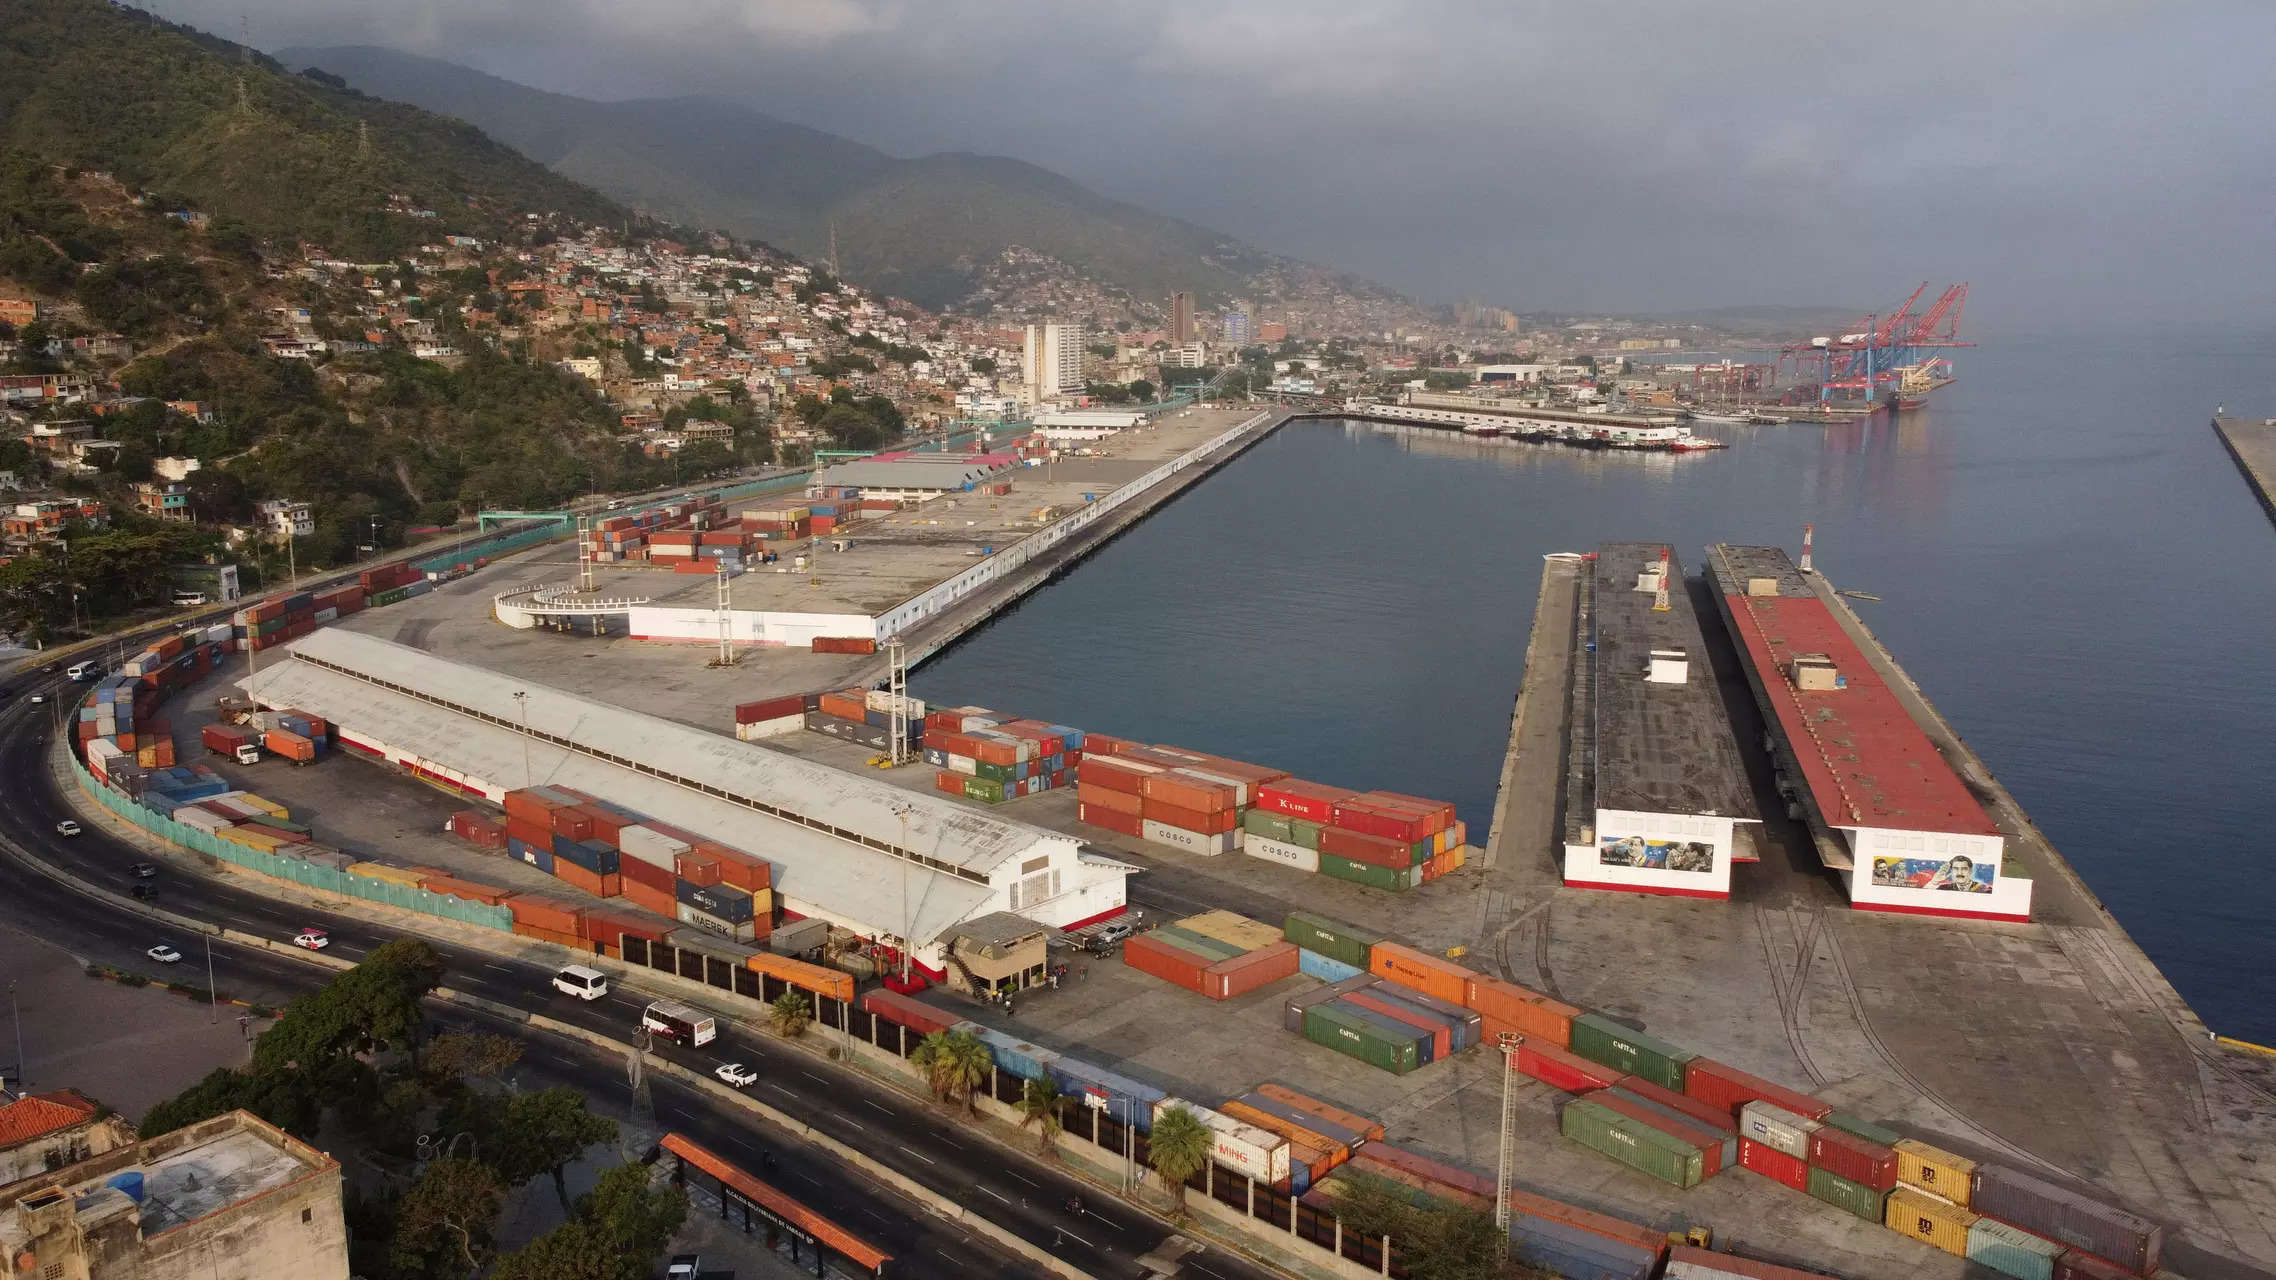 <p>Venezuela exported 600,000 barrels per day (bpd) in the first quarter, of which 165,000 bpd were destined for the United States, ANZ Research said, adding that as volumes are moderate, the impact is likely to be 'small'.</p>